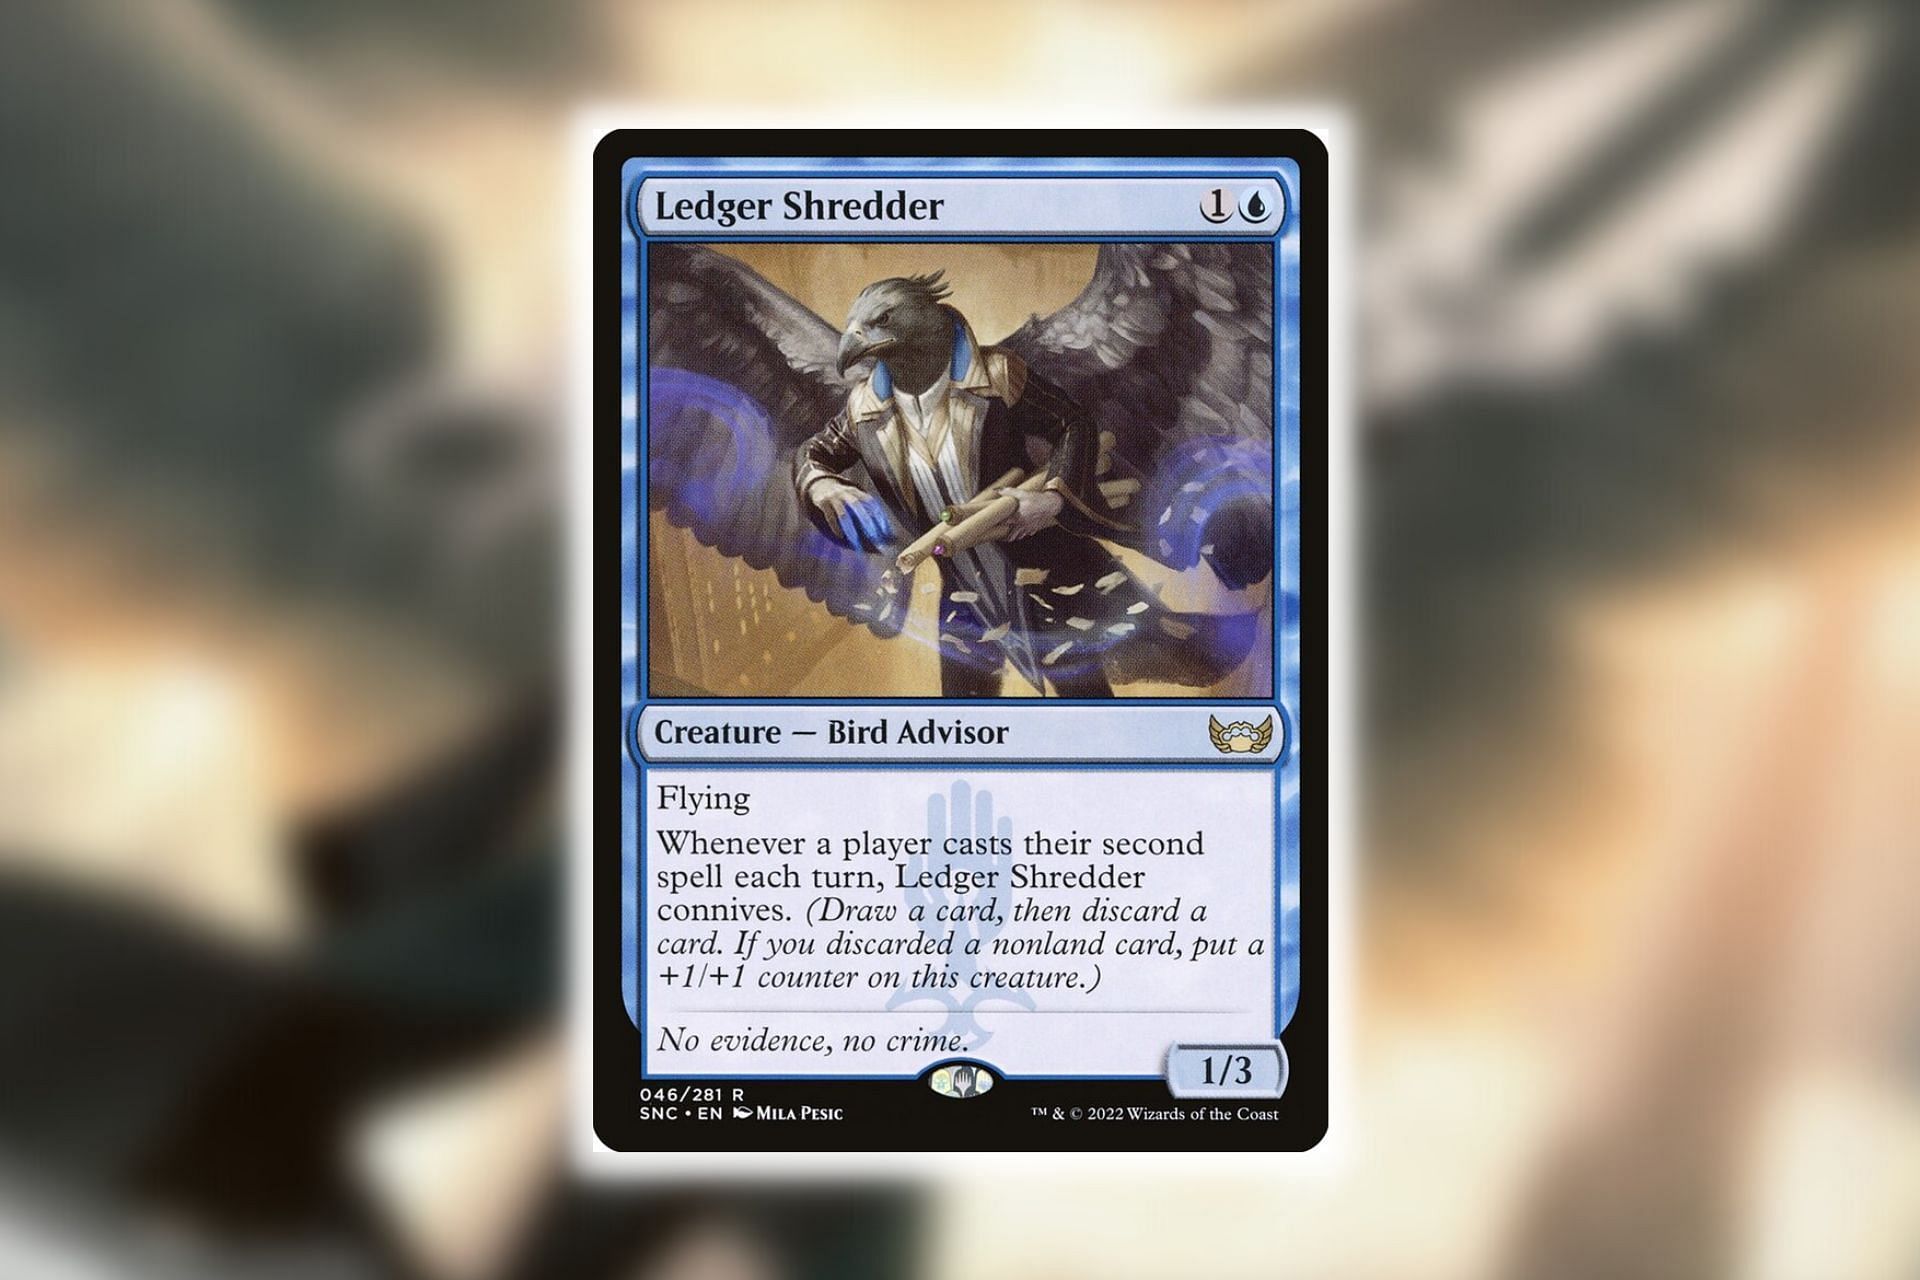 Ledger Shredder in Magic: The Gathering (Image via Wizards of the Coast)